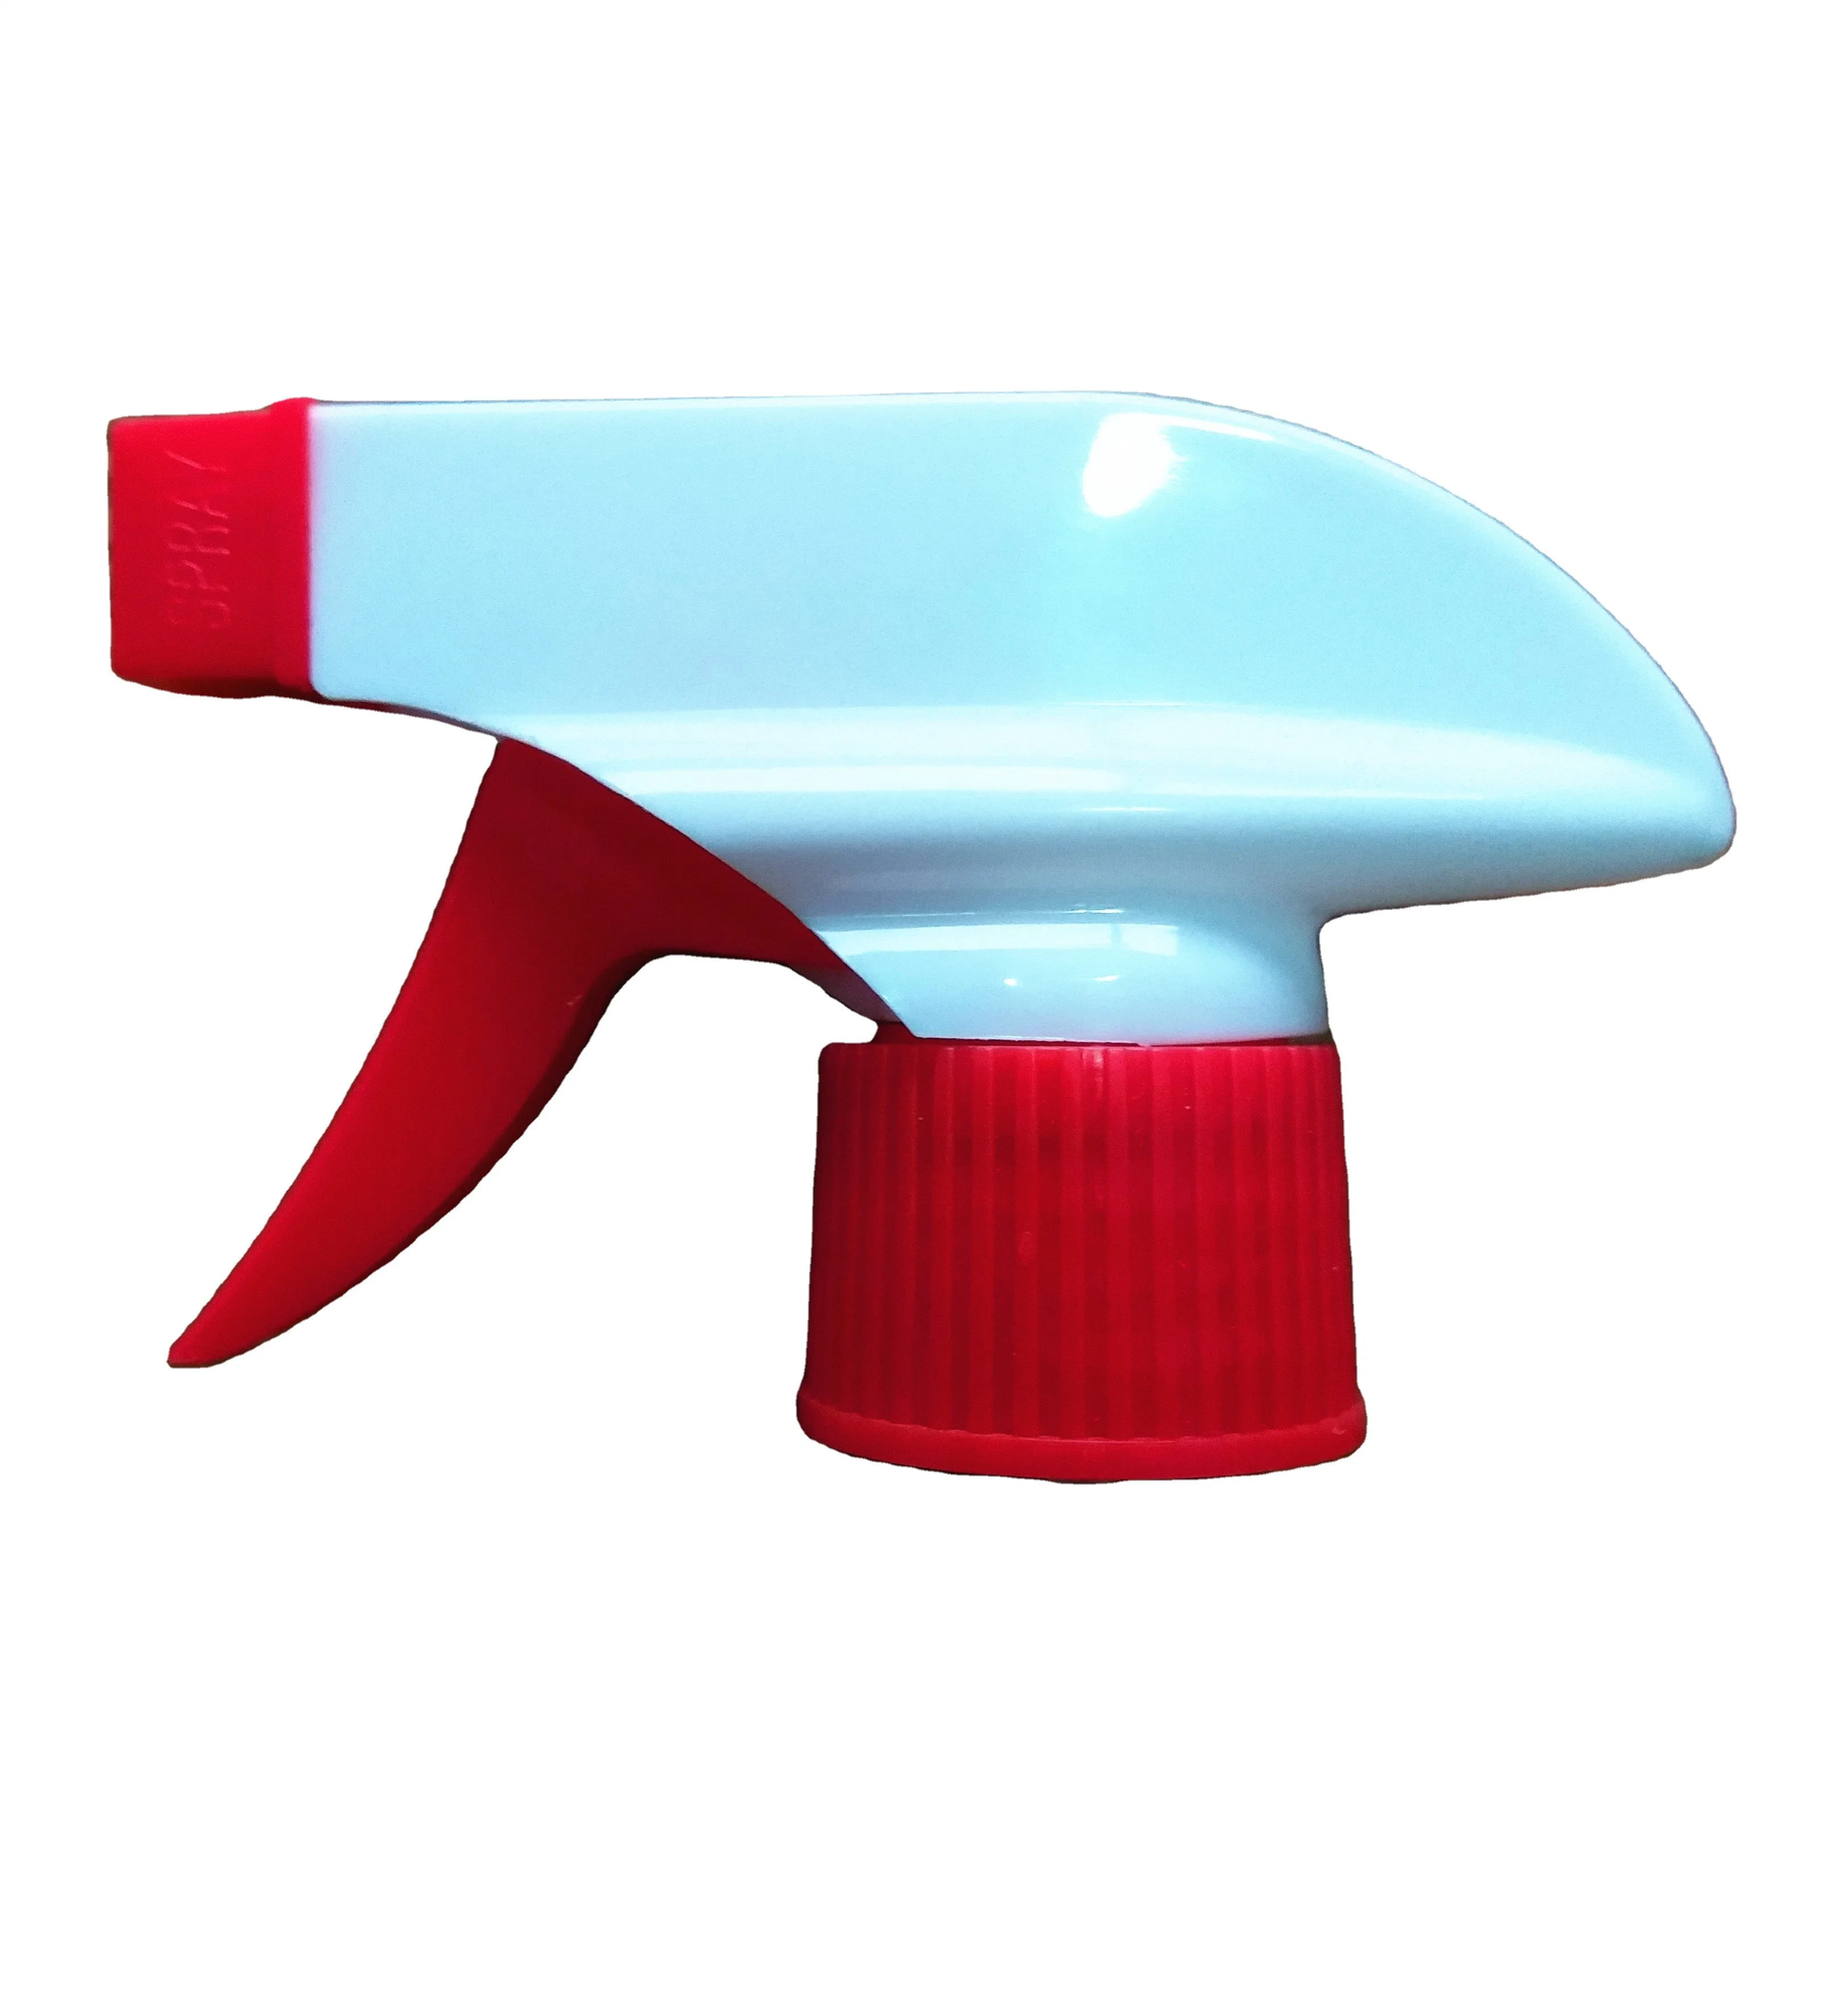 0.8ml Output Plastic Trigger Sprayer Head for Cleaning Bottles